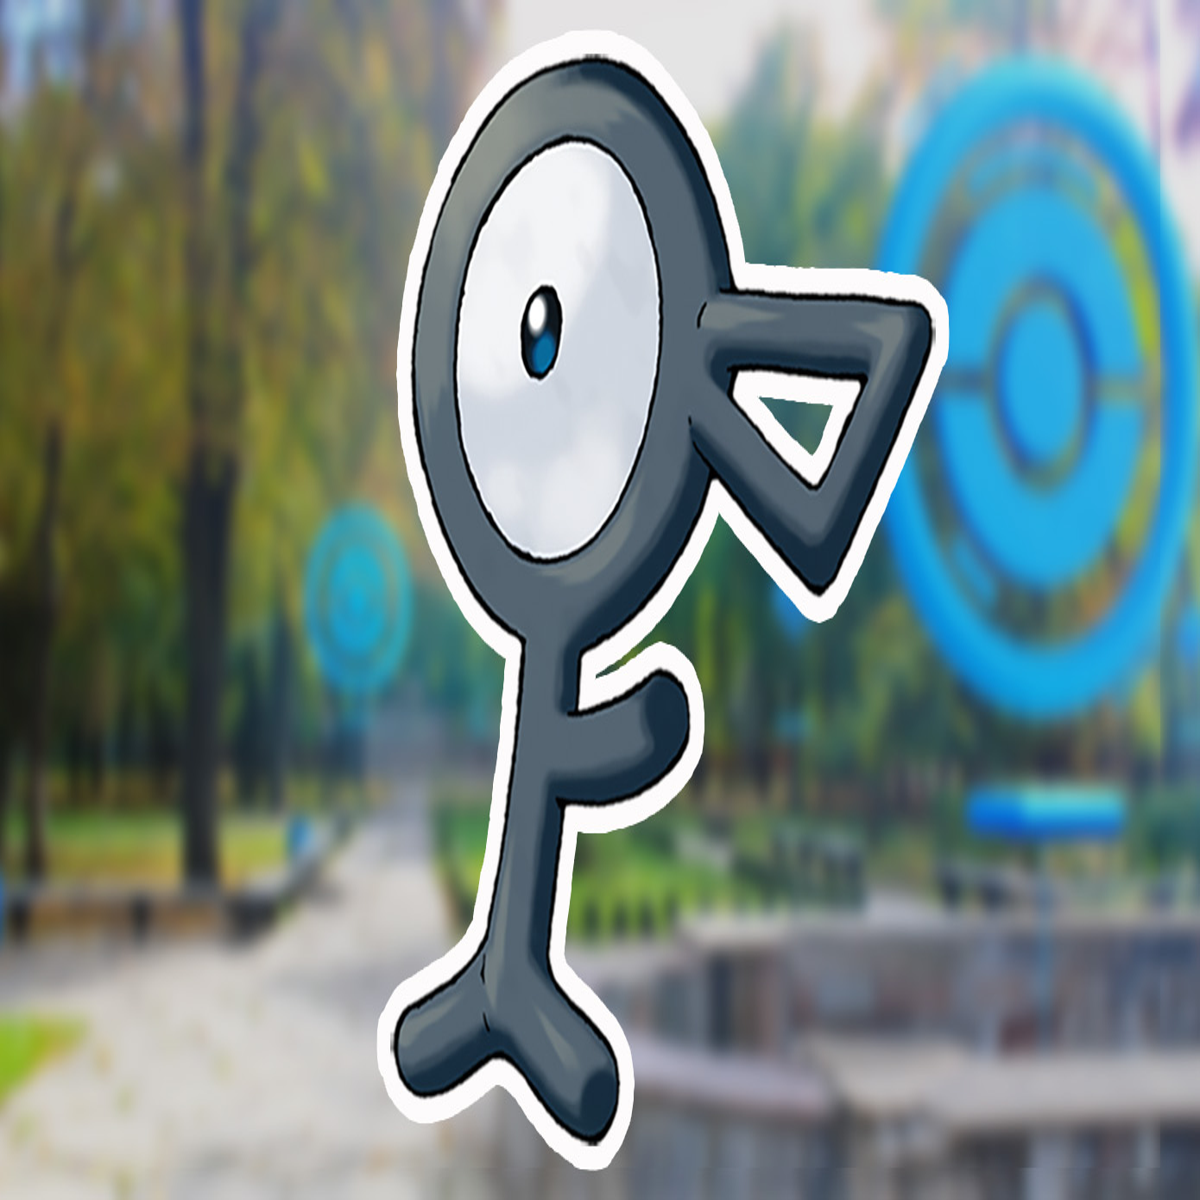 Unown Raids Are In Pokémon GO, But Is Shiny Unown Worth Hunting?